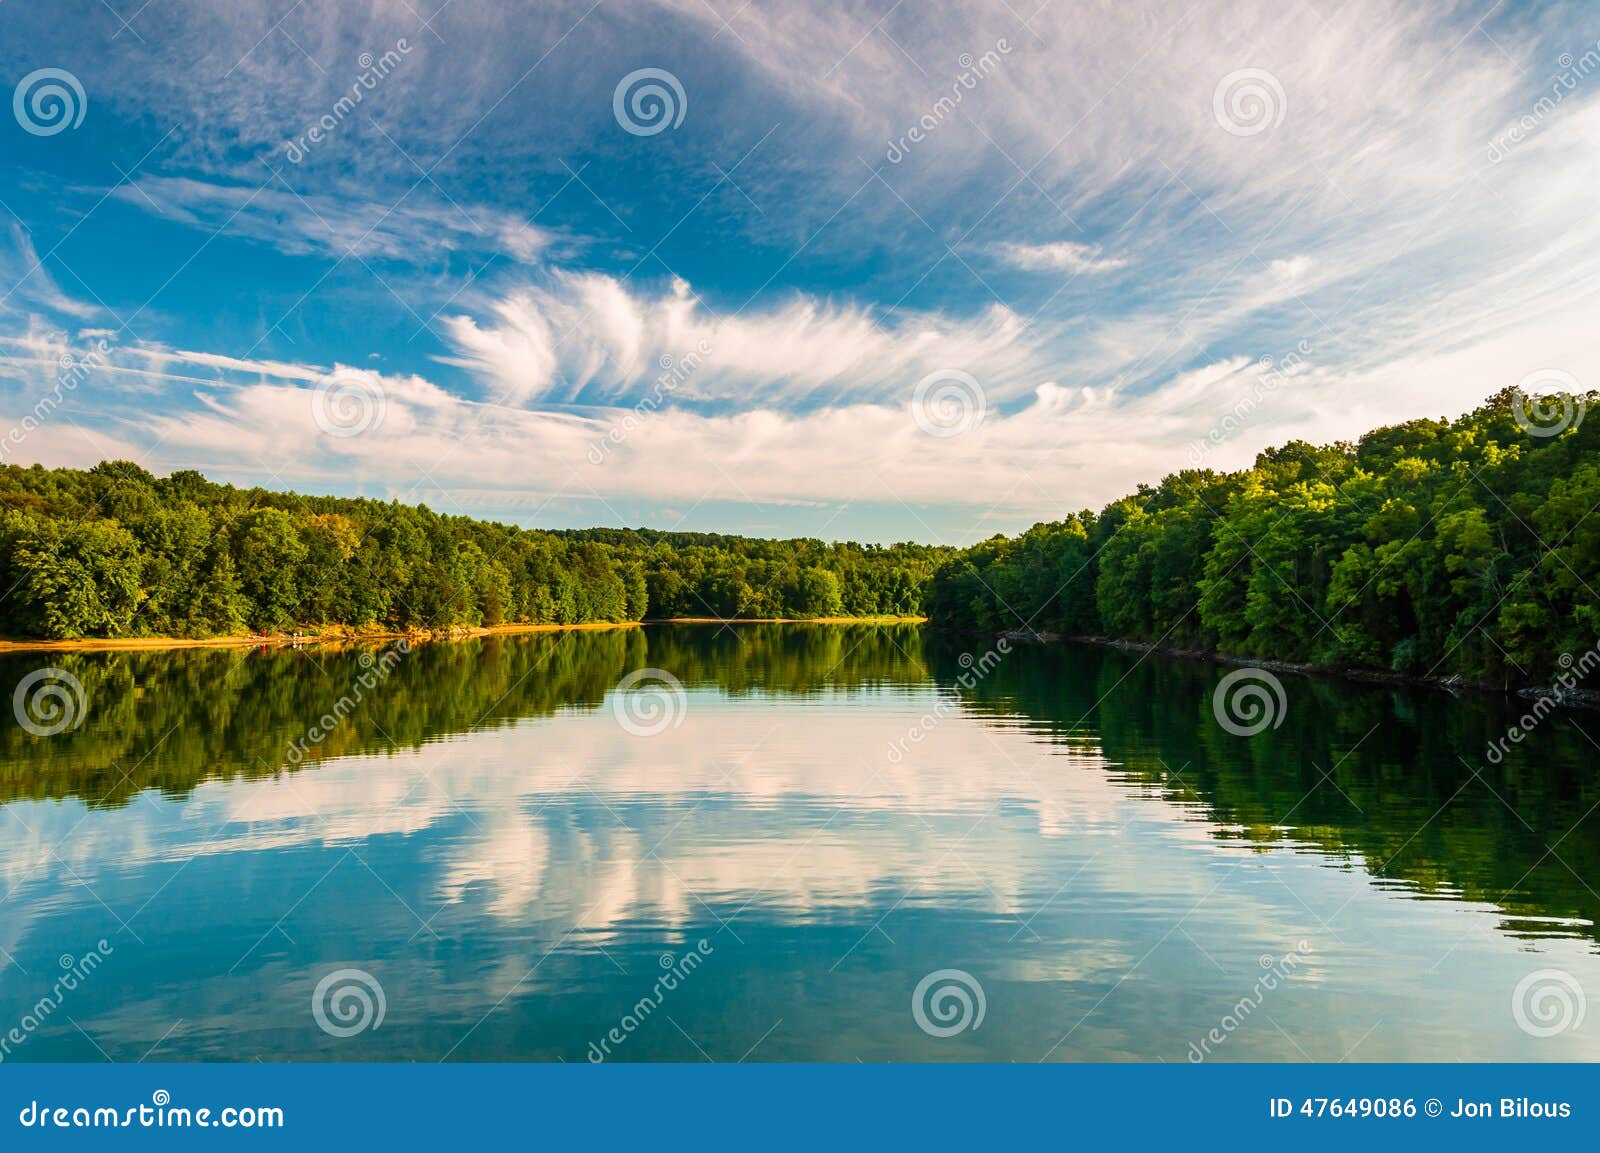 evening reflections of clouds and trees in lake marburg, codorus state park, pennsylvania.